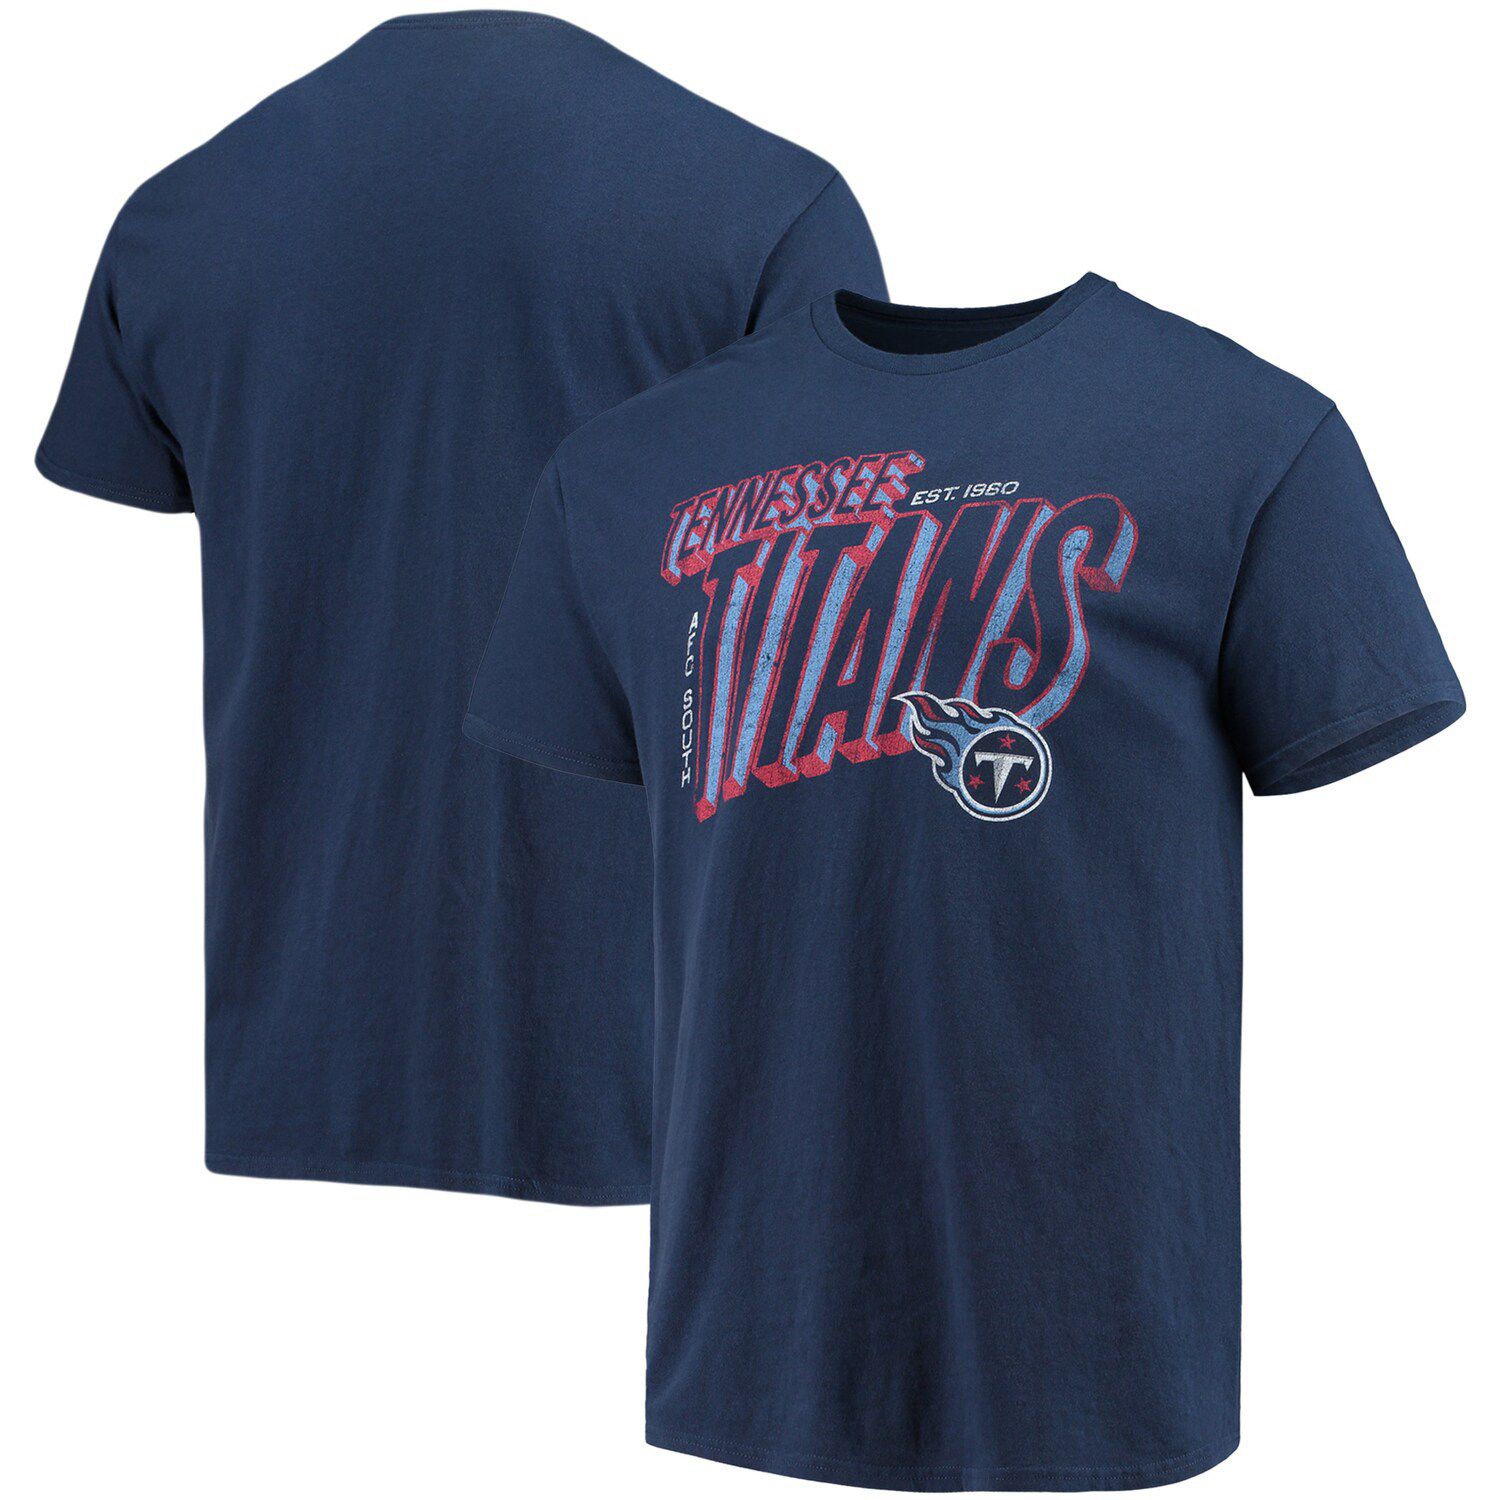 Image for Unbranded Men's Junk Food Navy Tennessee Titans Local T-Shirt at Kohl's.